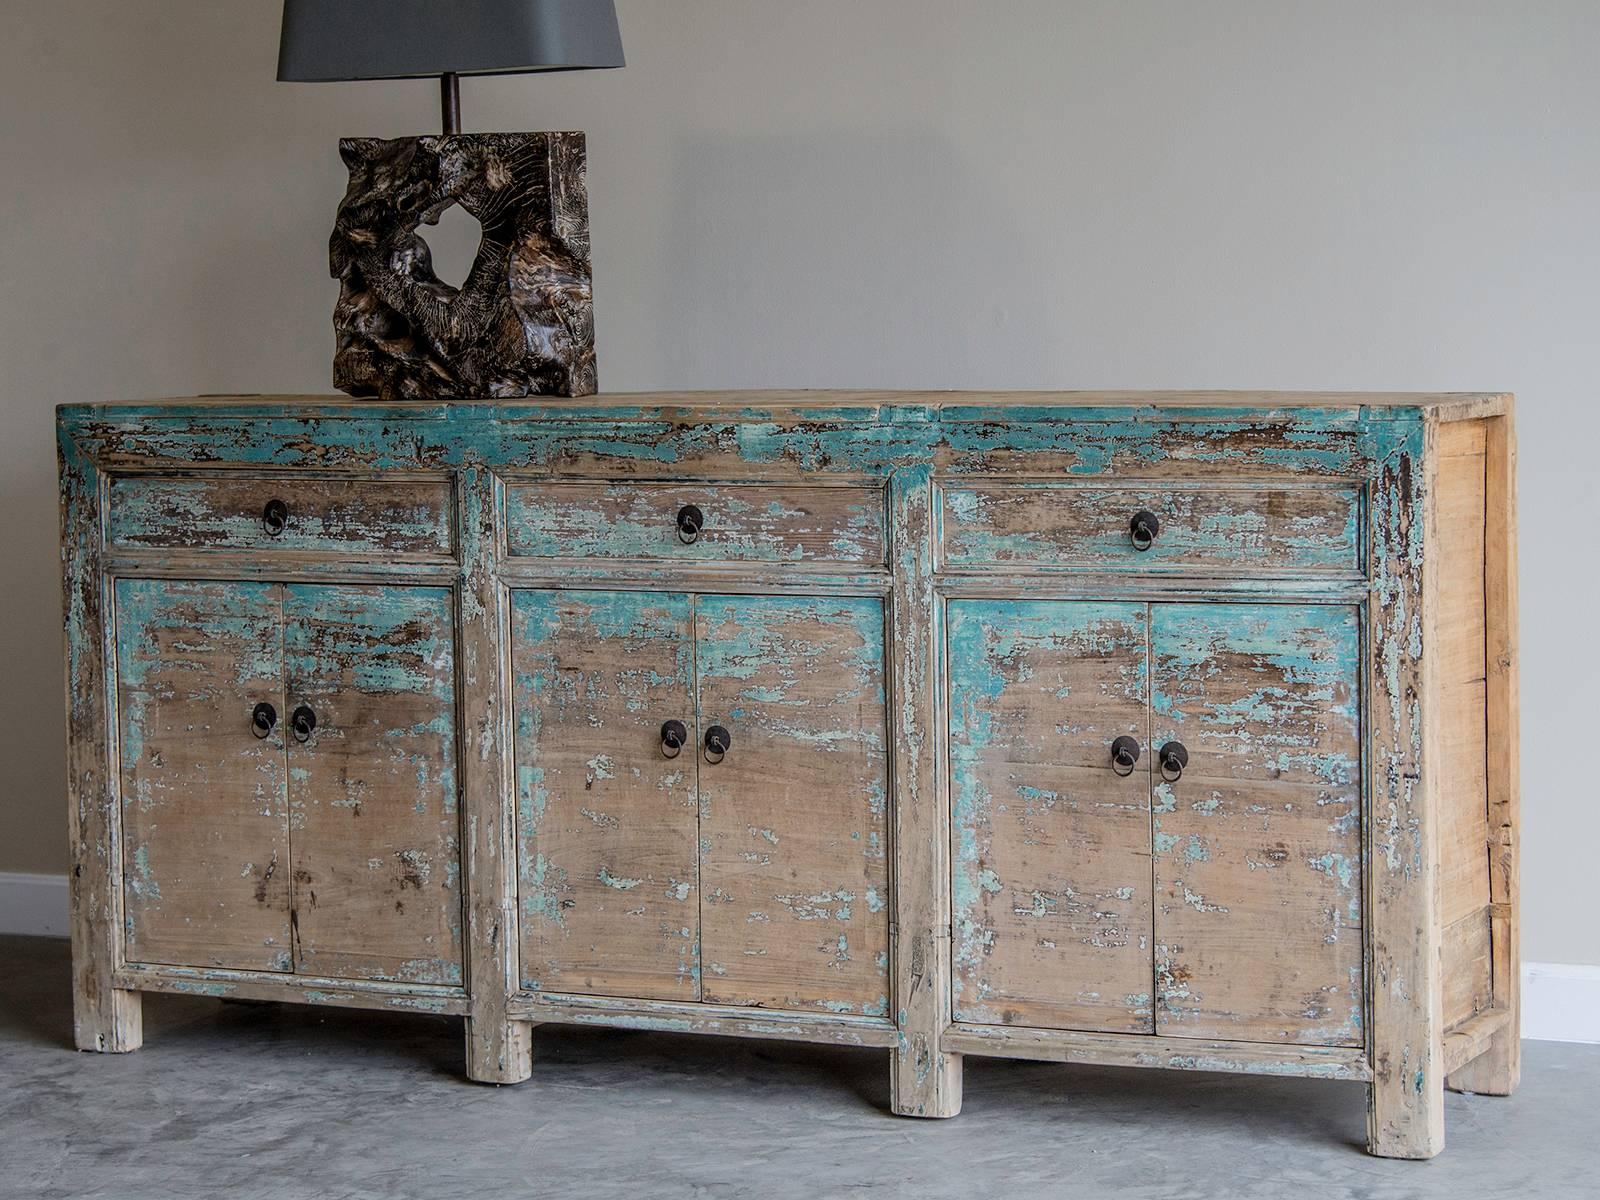 Receive our new selections direct from 1stdibs by email each week. Please click follow dealer below and see them first!

The turquoise color of the original paint on this vintage Chinese buffet circa 1900 is a beautiful contrast to the elmwood